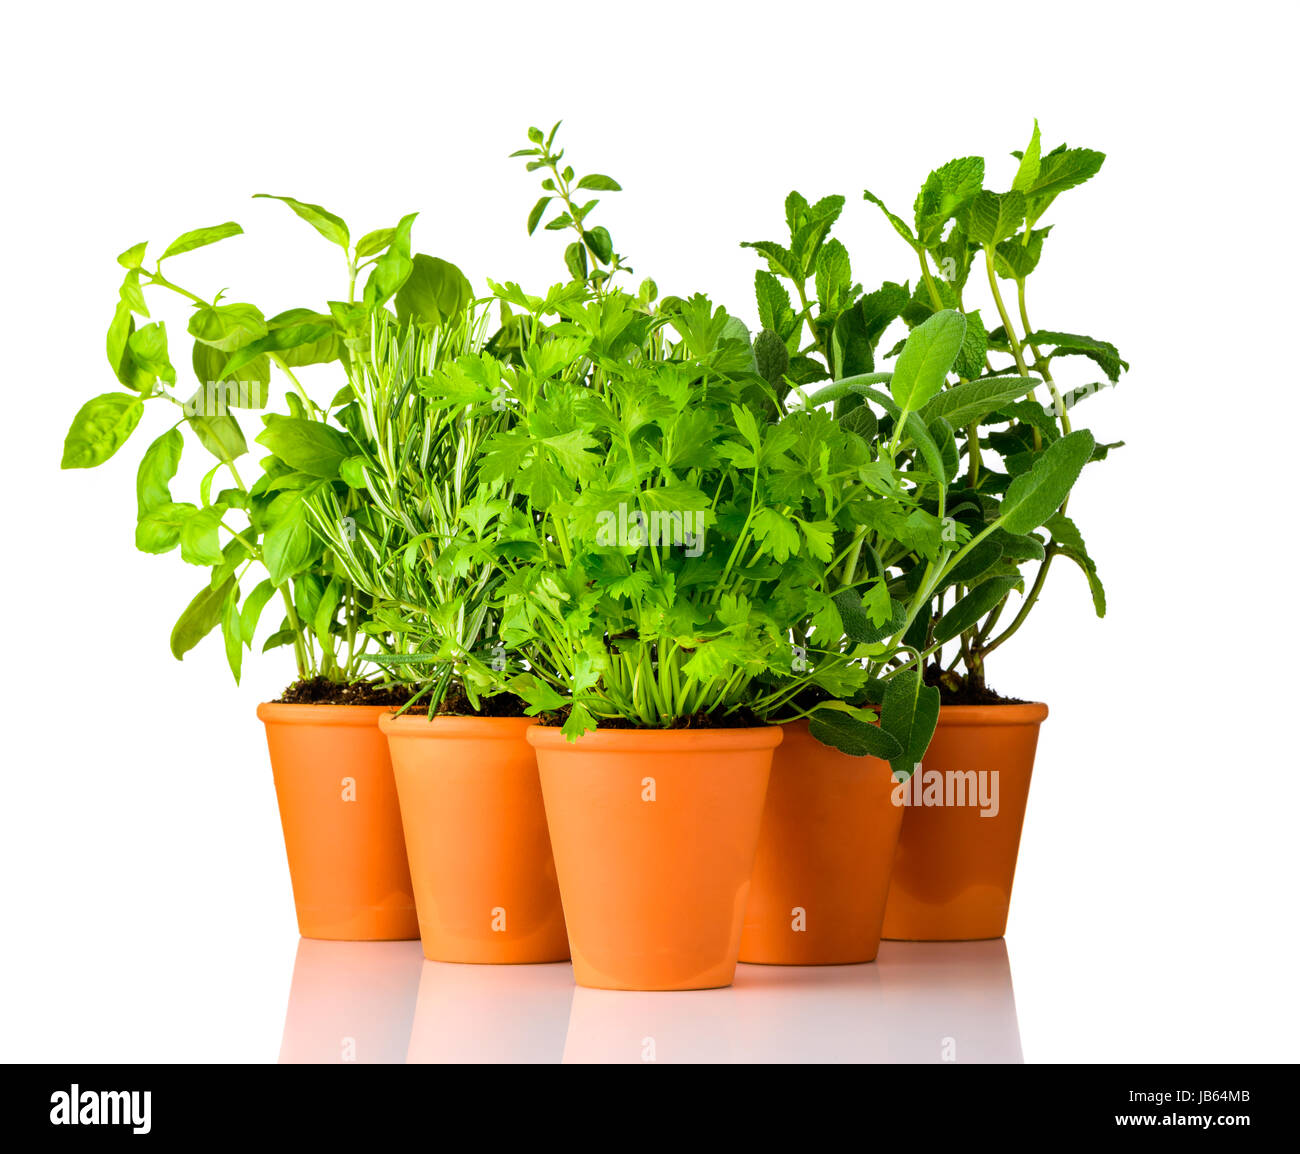 Culinary Green Herbs Growing in Pottery Pots on White Background. Parsley, Rosemary, Sage and basil Stock Photo